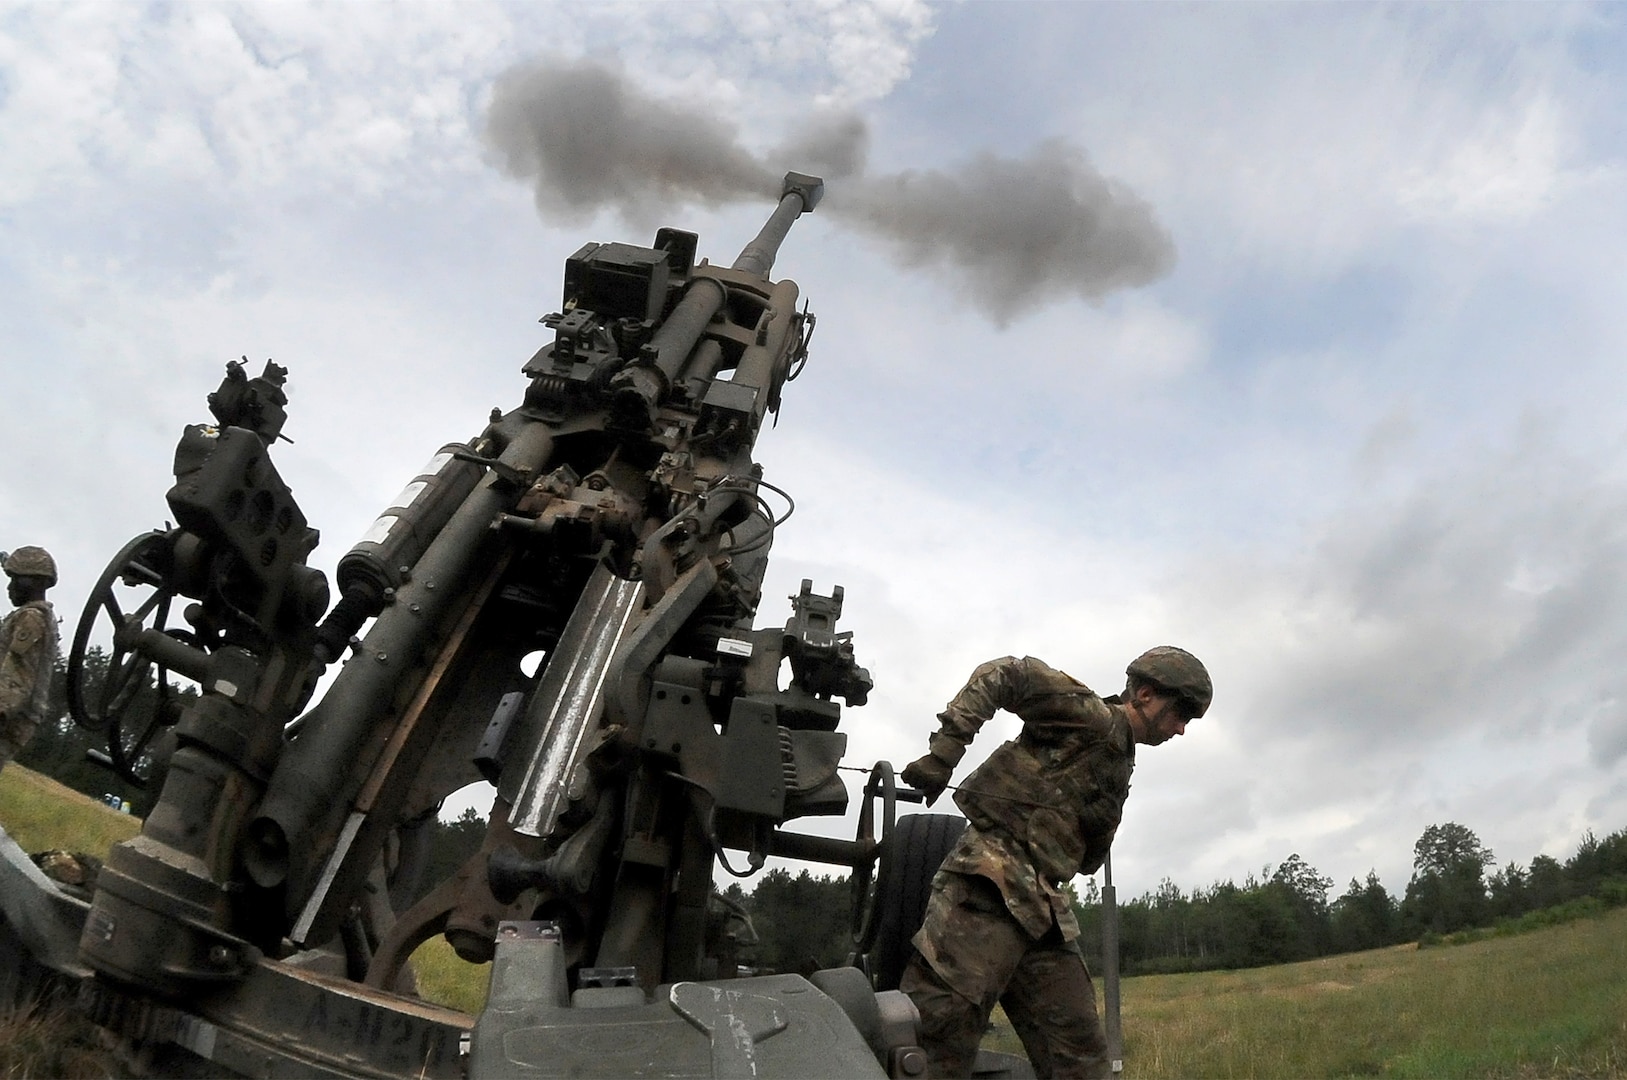 Soldiers with the Michigan Army National Guard's B Battery, 1st Battalion, 119th Field Artillery Regiment execute a direct fire mission during exercise Northern Strike at Camp Grayling, Michigan, July 26, 2020.